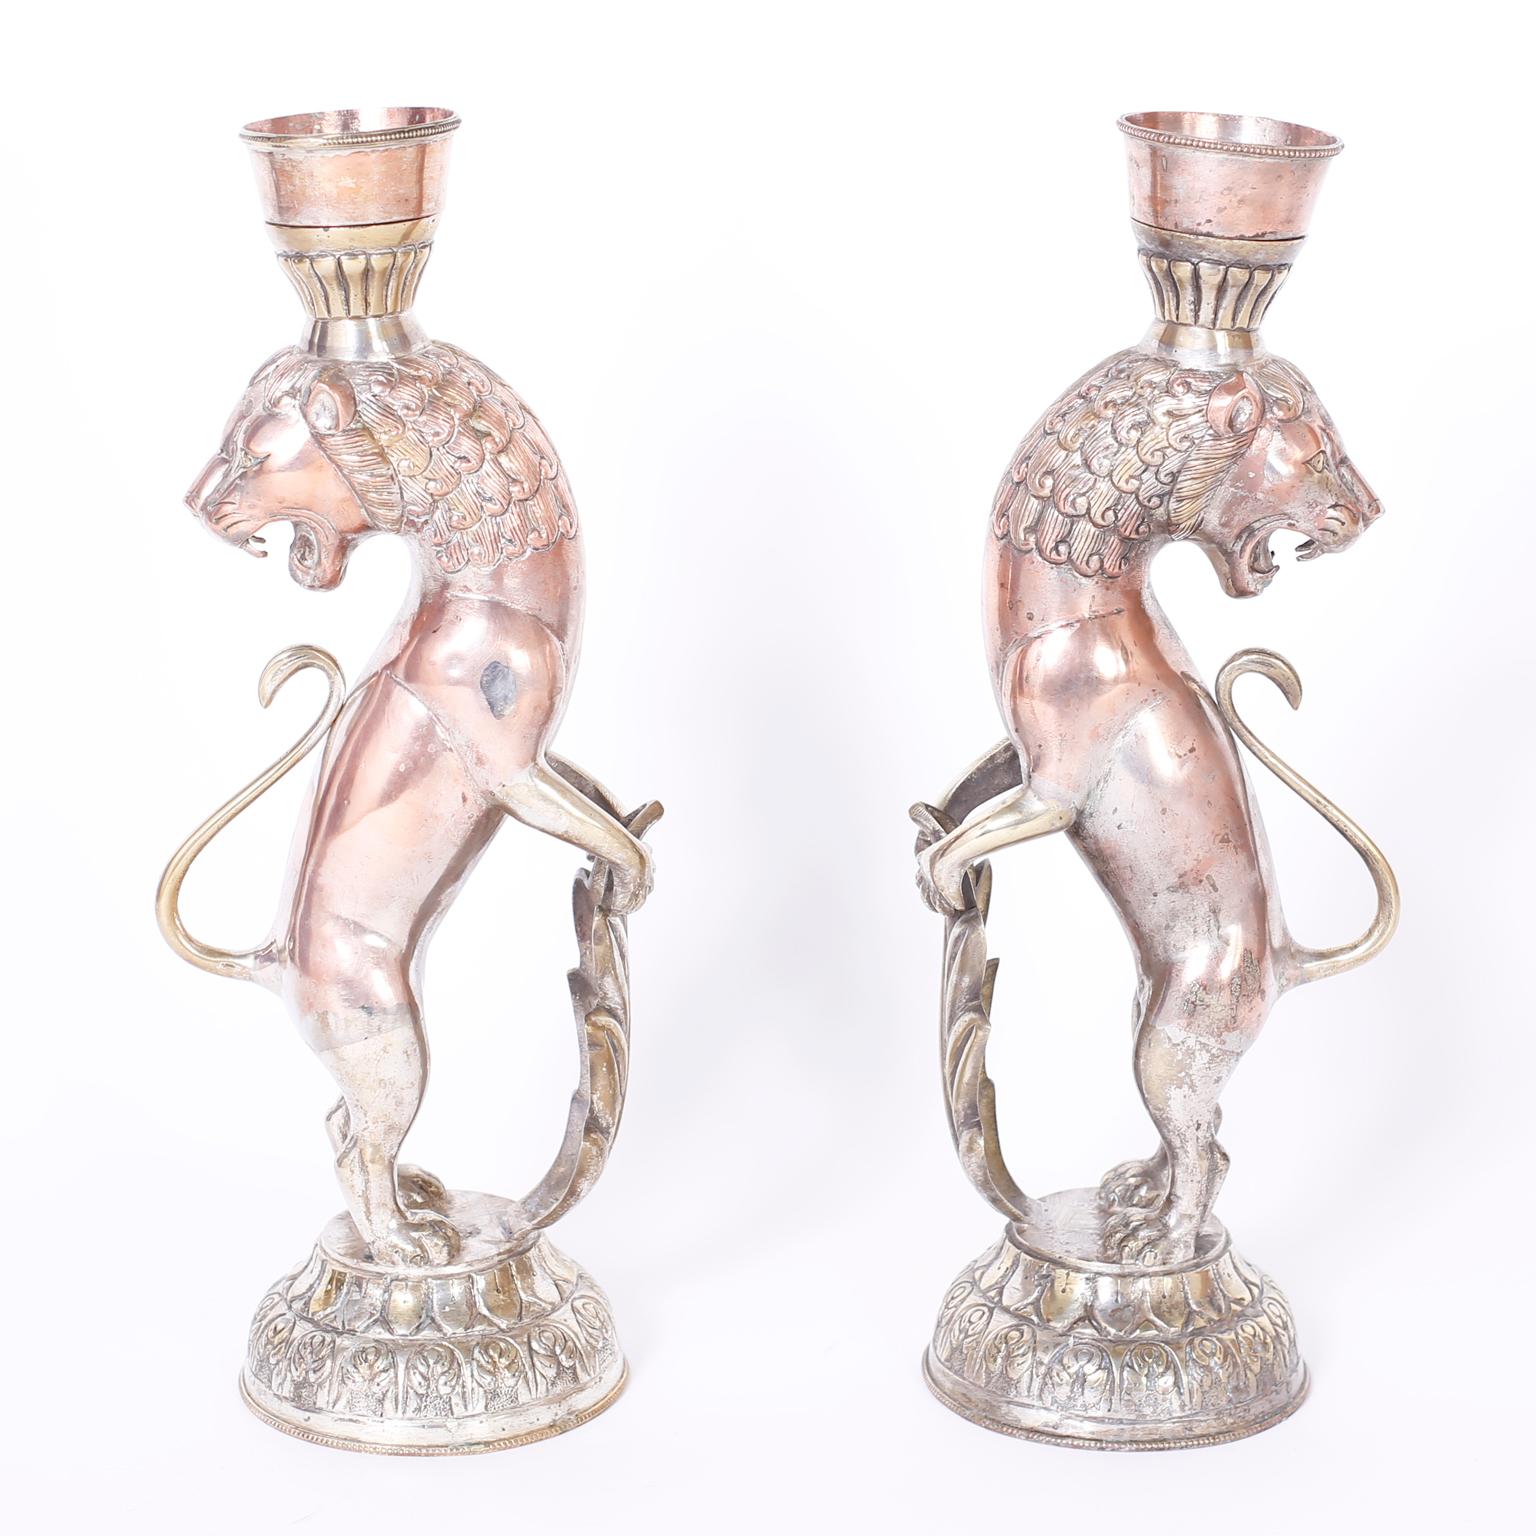 Antique pair of Moroccan lion candlesticks crafted in copper and brass with a silver plated finish now worn to perfection.